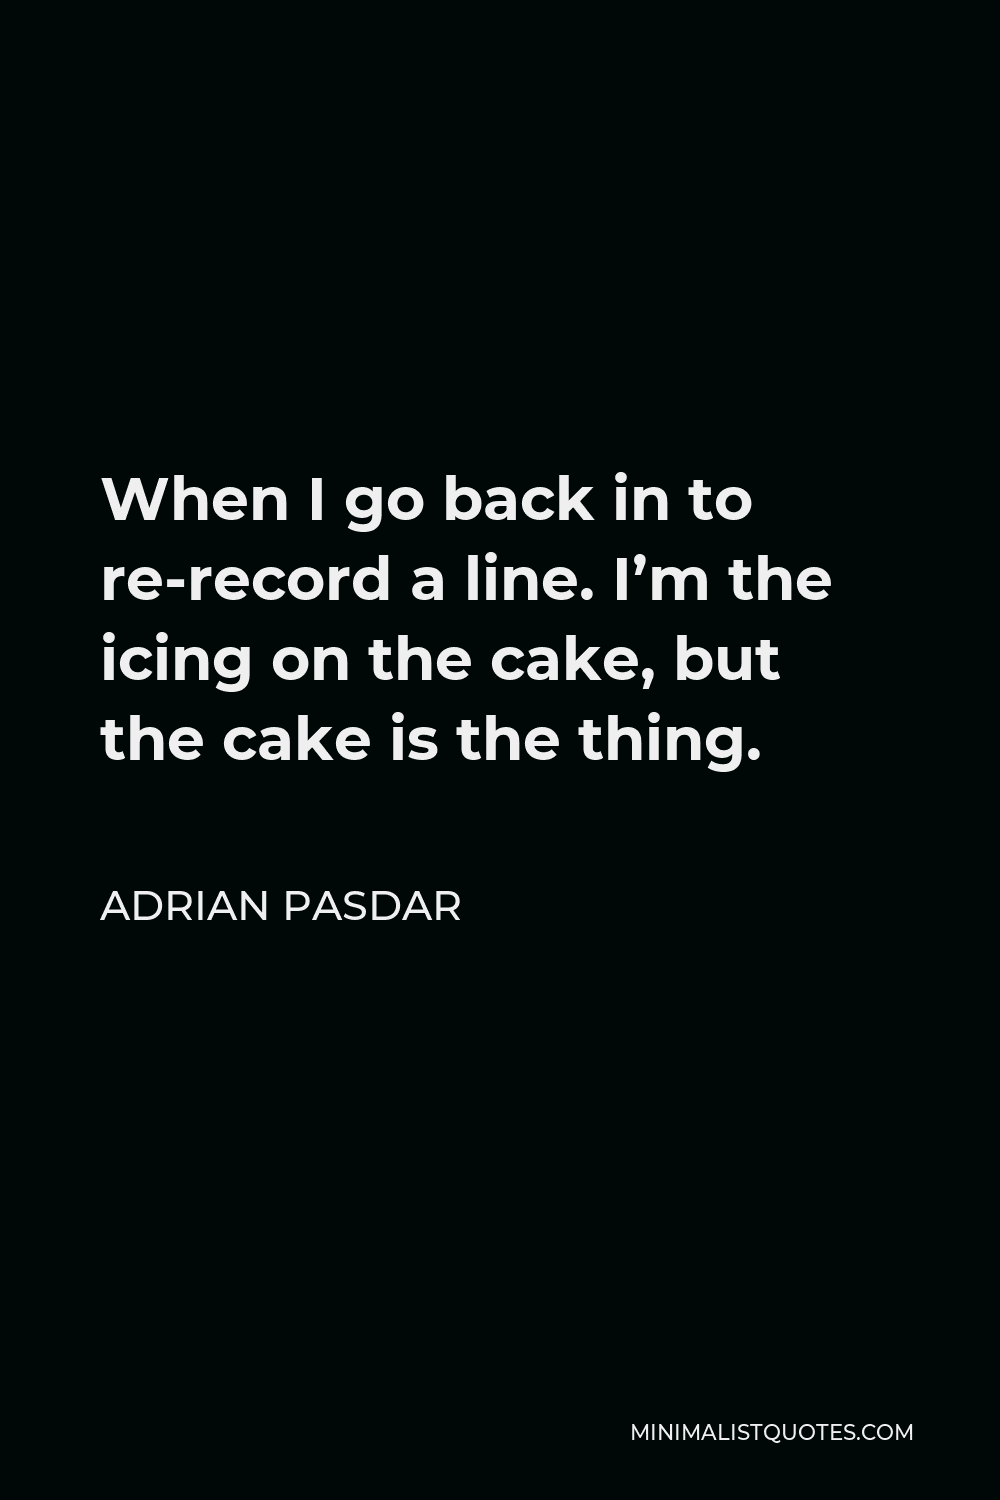 Adrian Pasdar Quote - When I go back in to re-record a line. I’m the icing on the cake, but the cake is the thing.